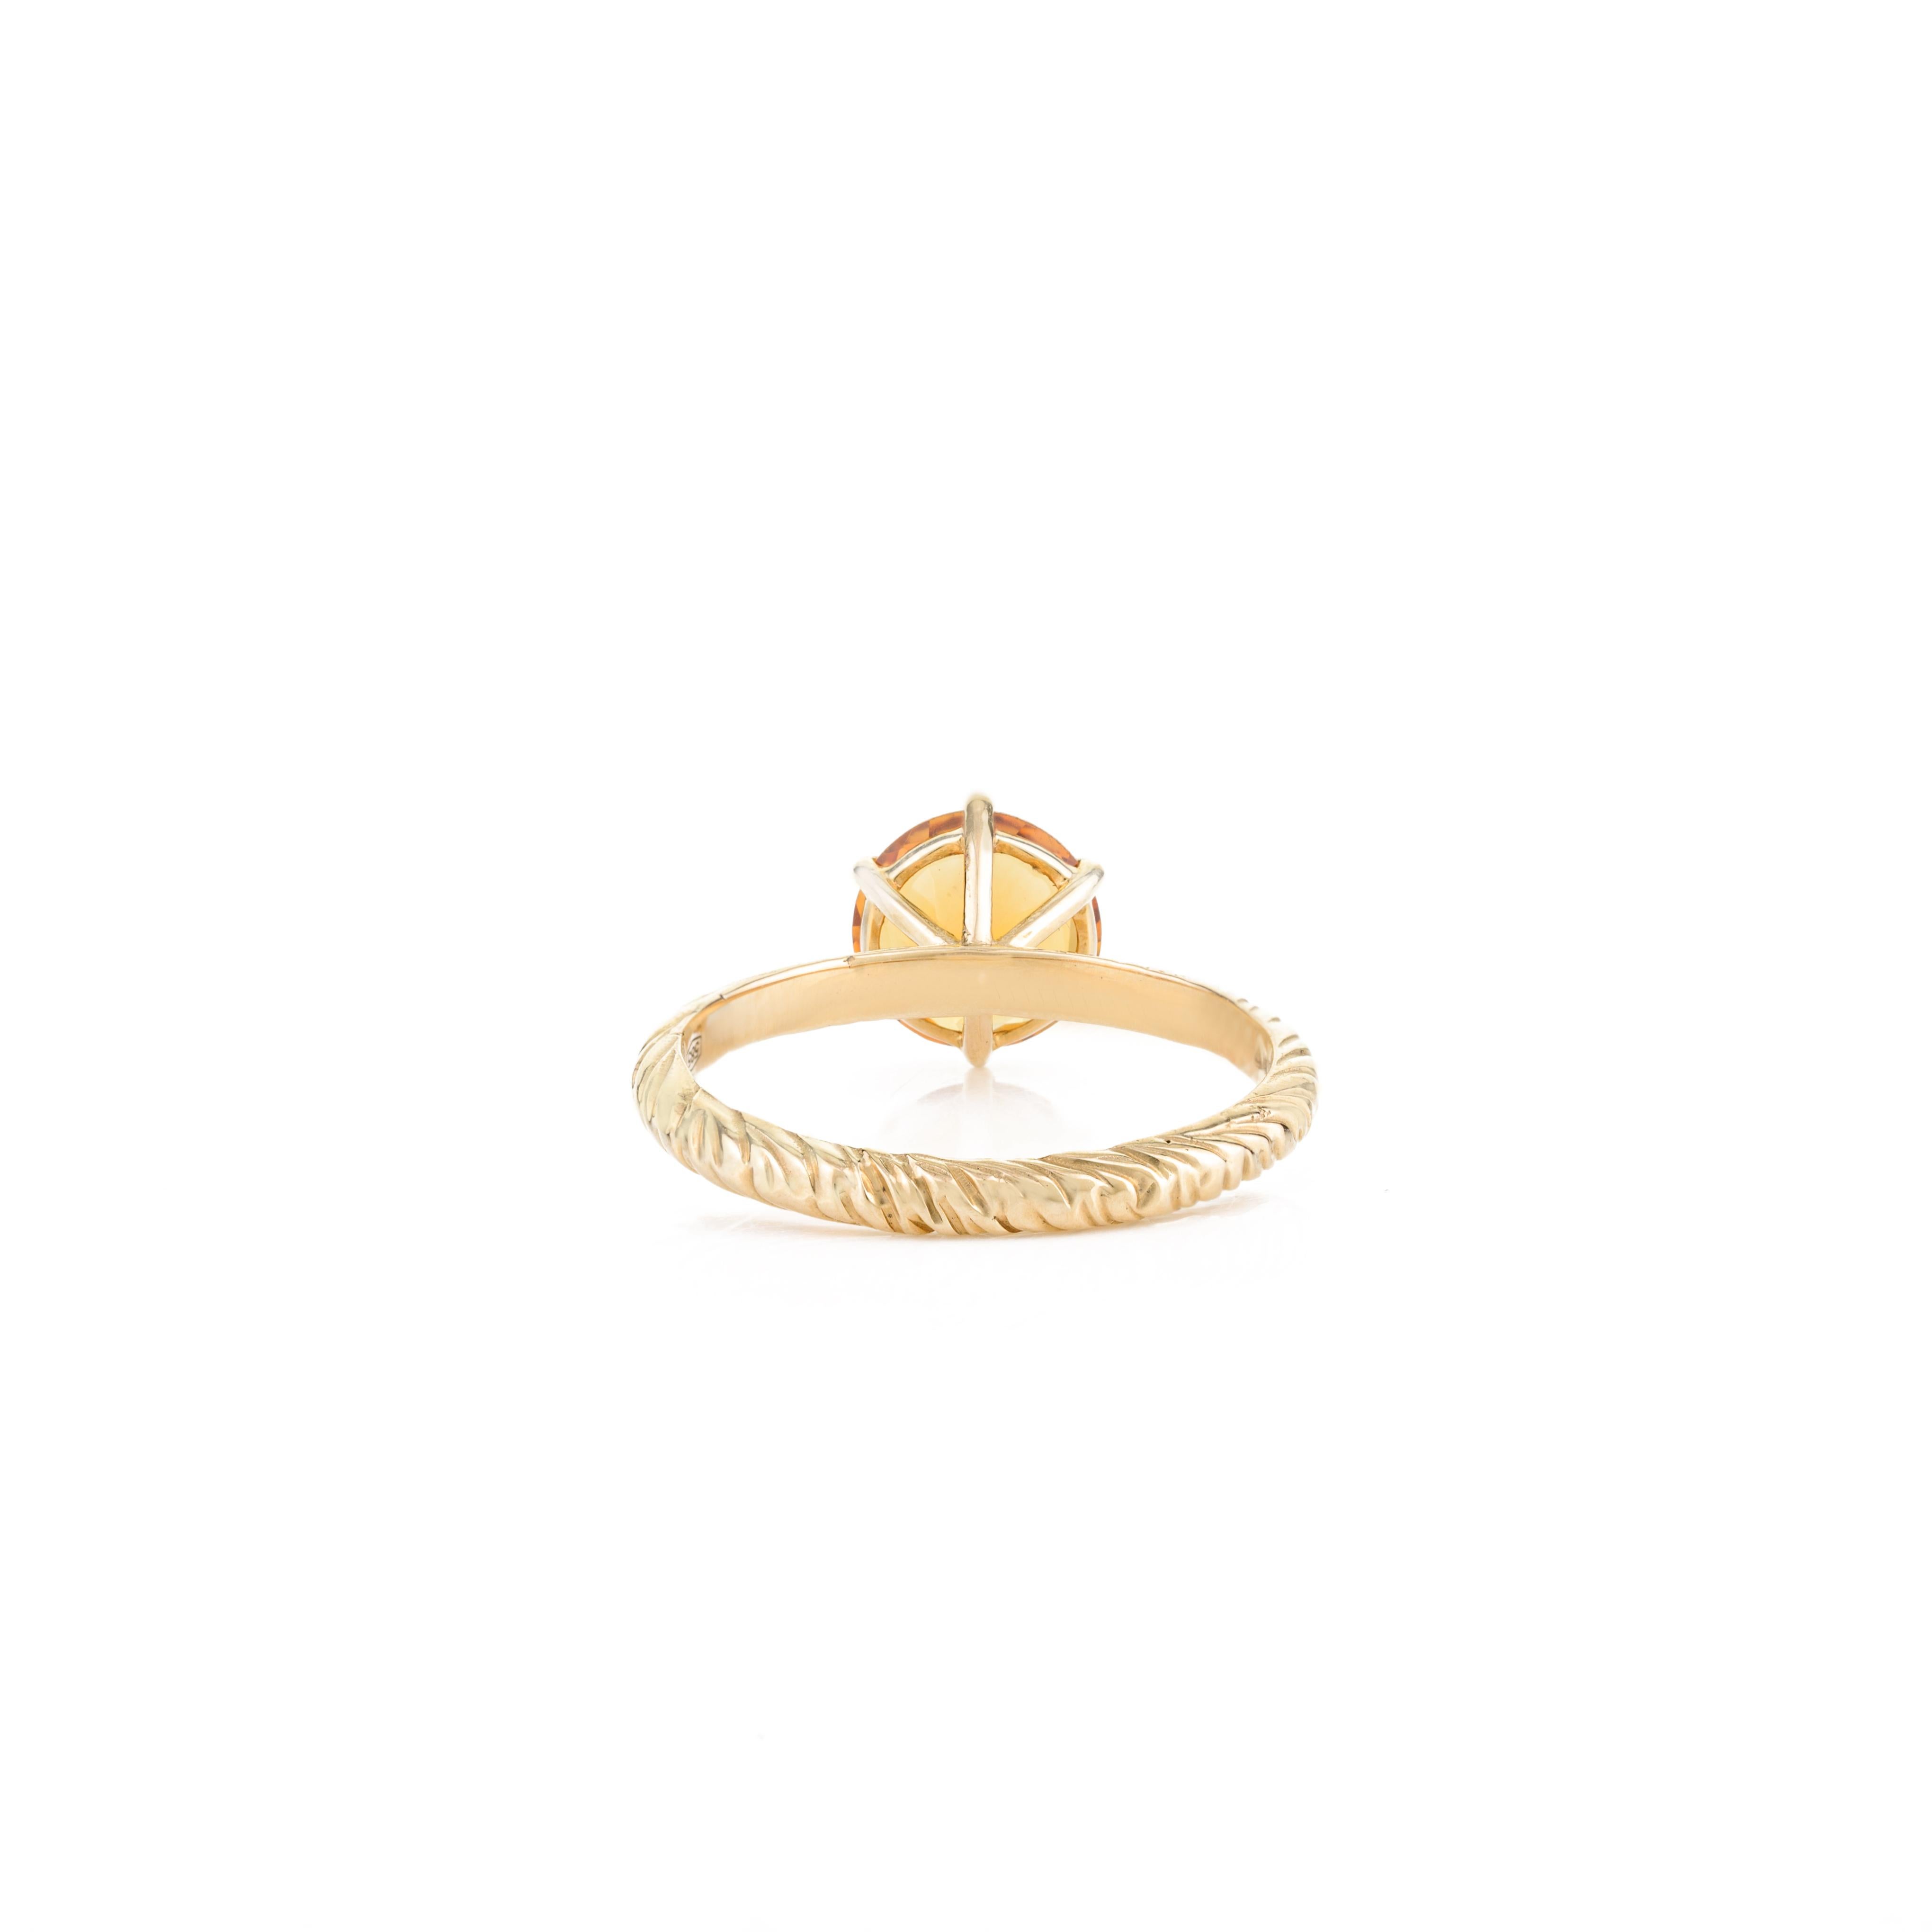 For Sale:  Round Cut Citrine Gemstone Solitaire Ring in 14k Solid Yellow Gold 7